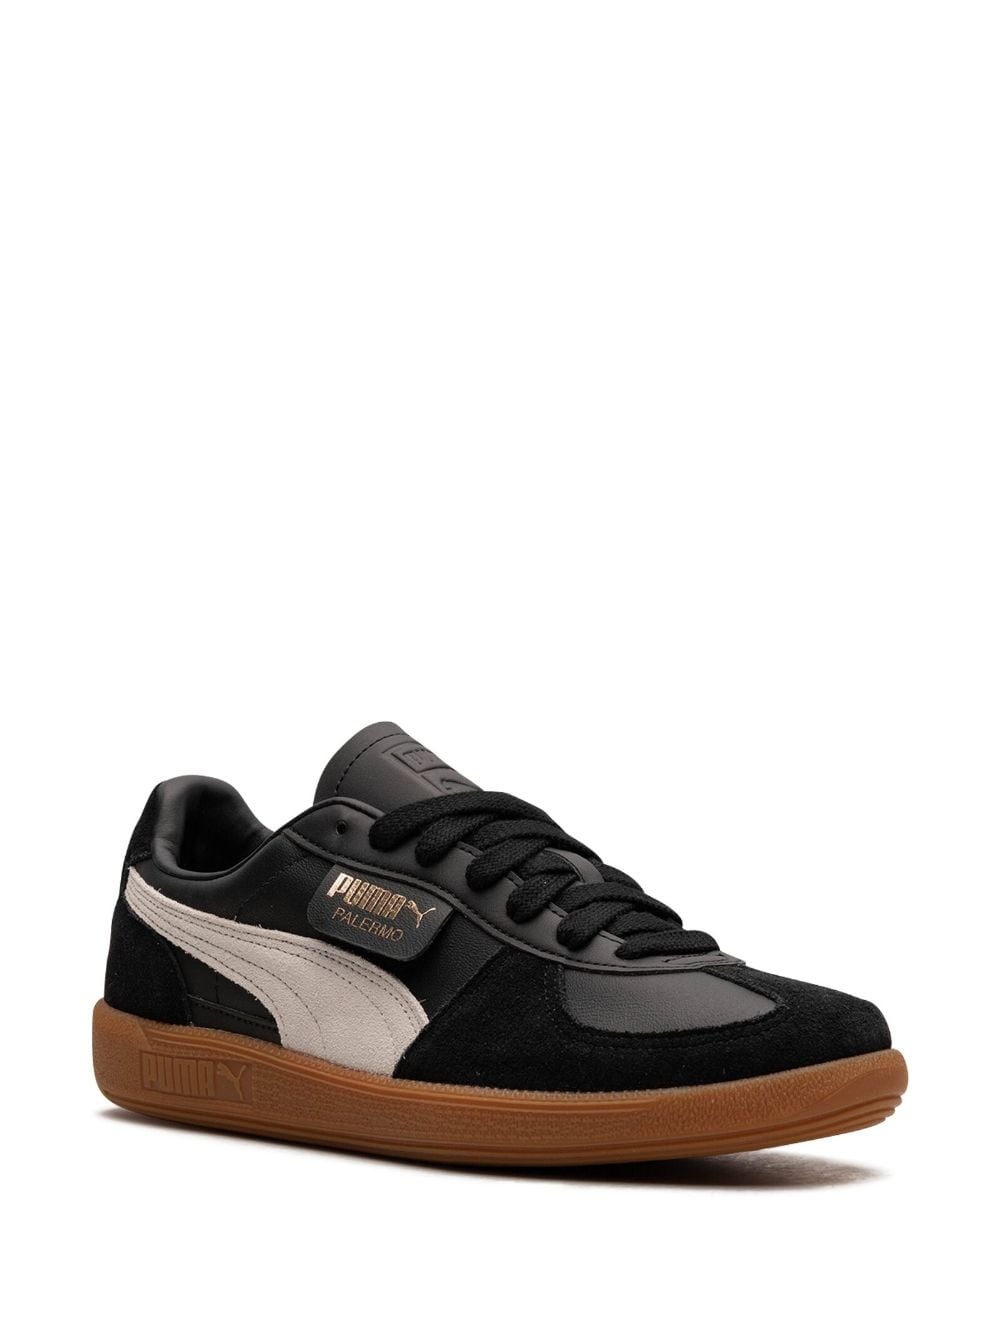 Palermo "Puma Black/Feather Gray/Gum" sneakers - 2